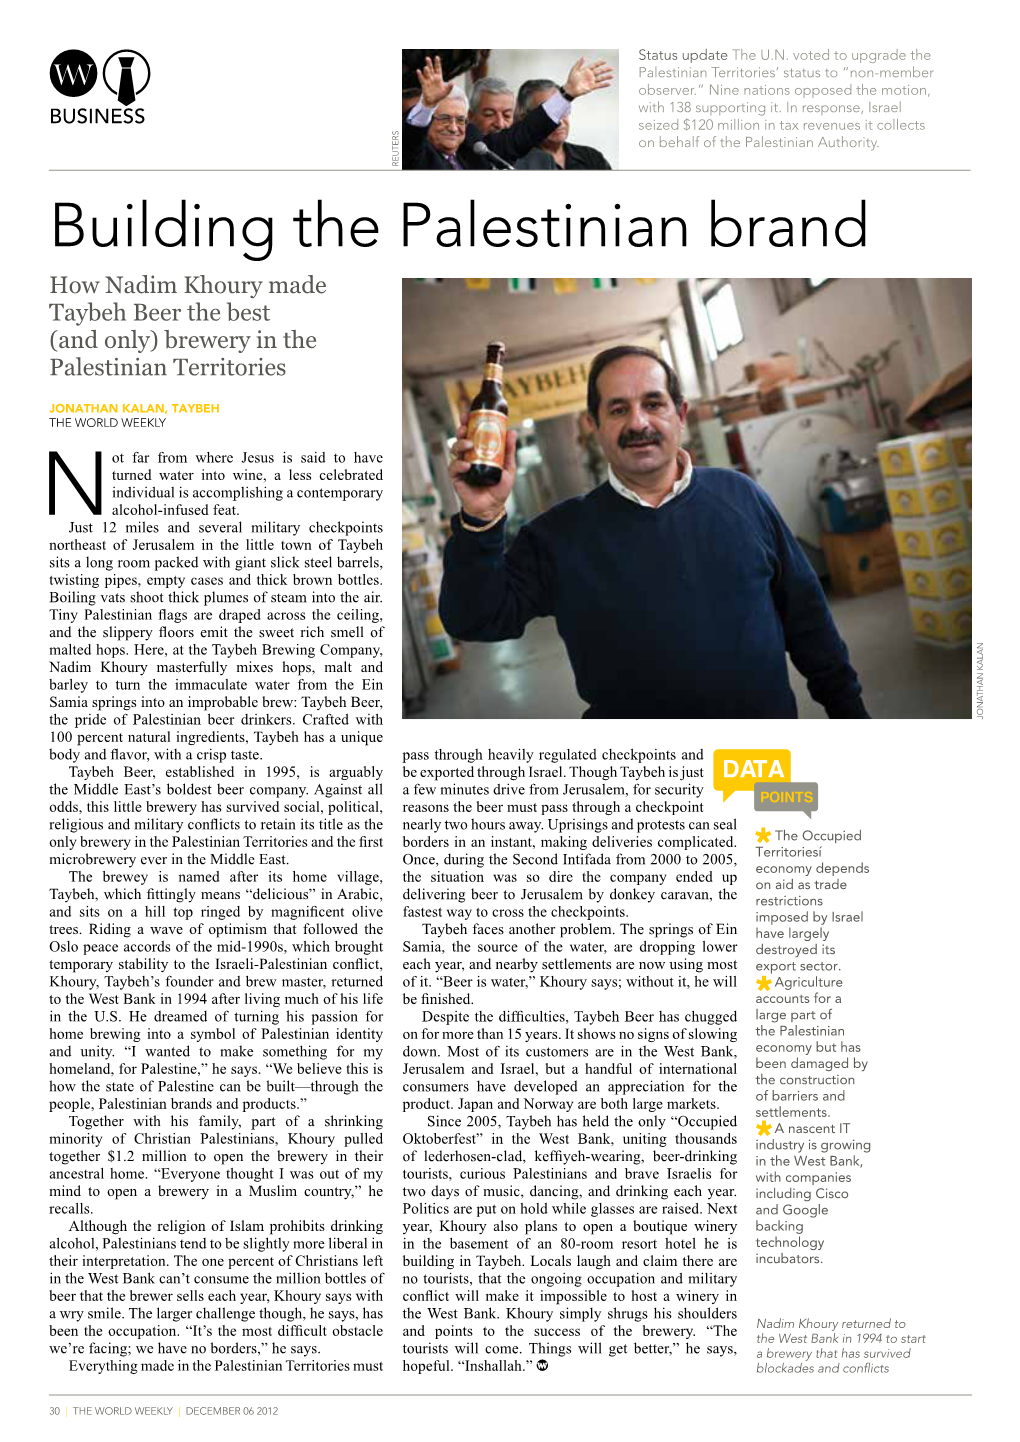 Building the Palestinian Brand How Nadim Khoury Made Taybeh Beer the Best (And Only) Brewery in the Palestinian Territories